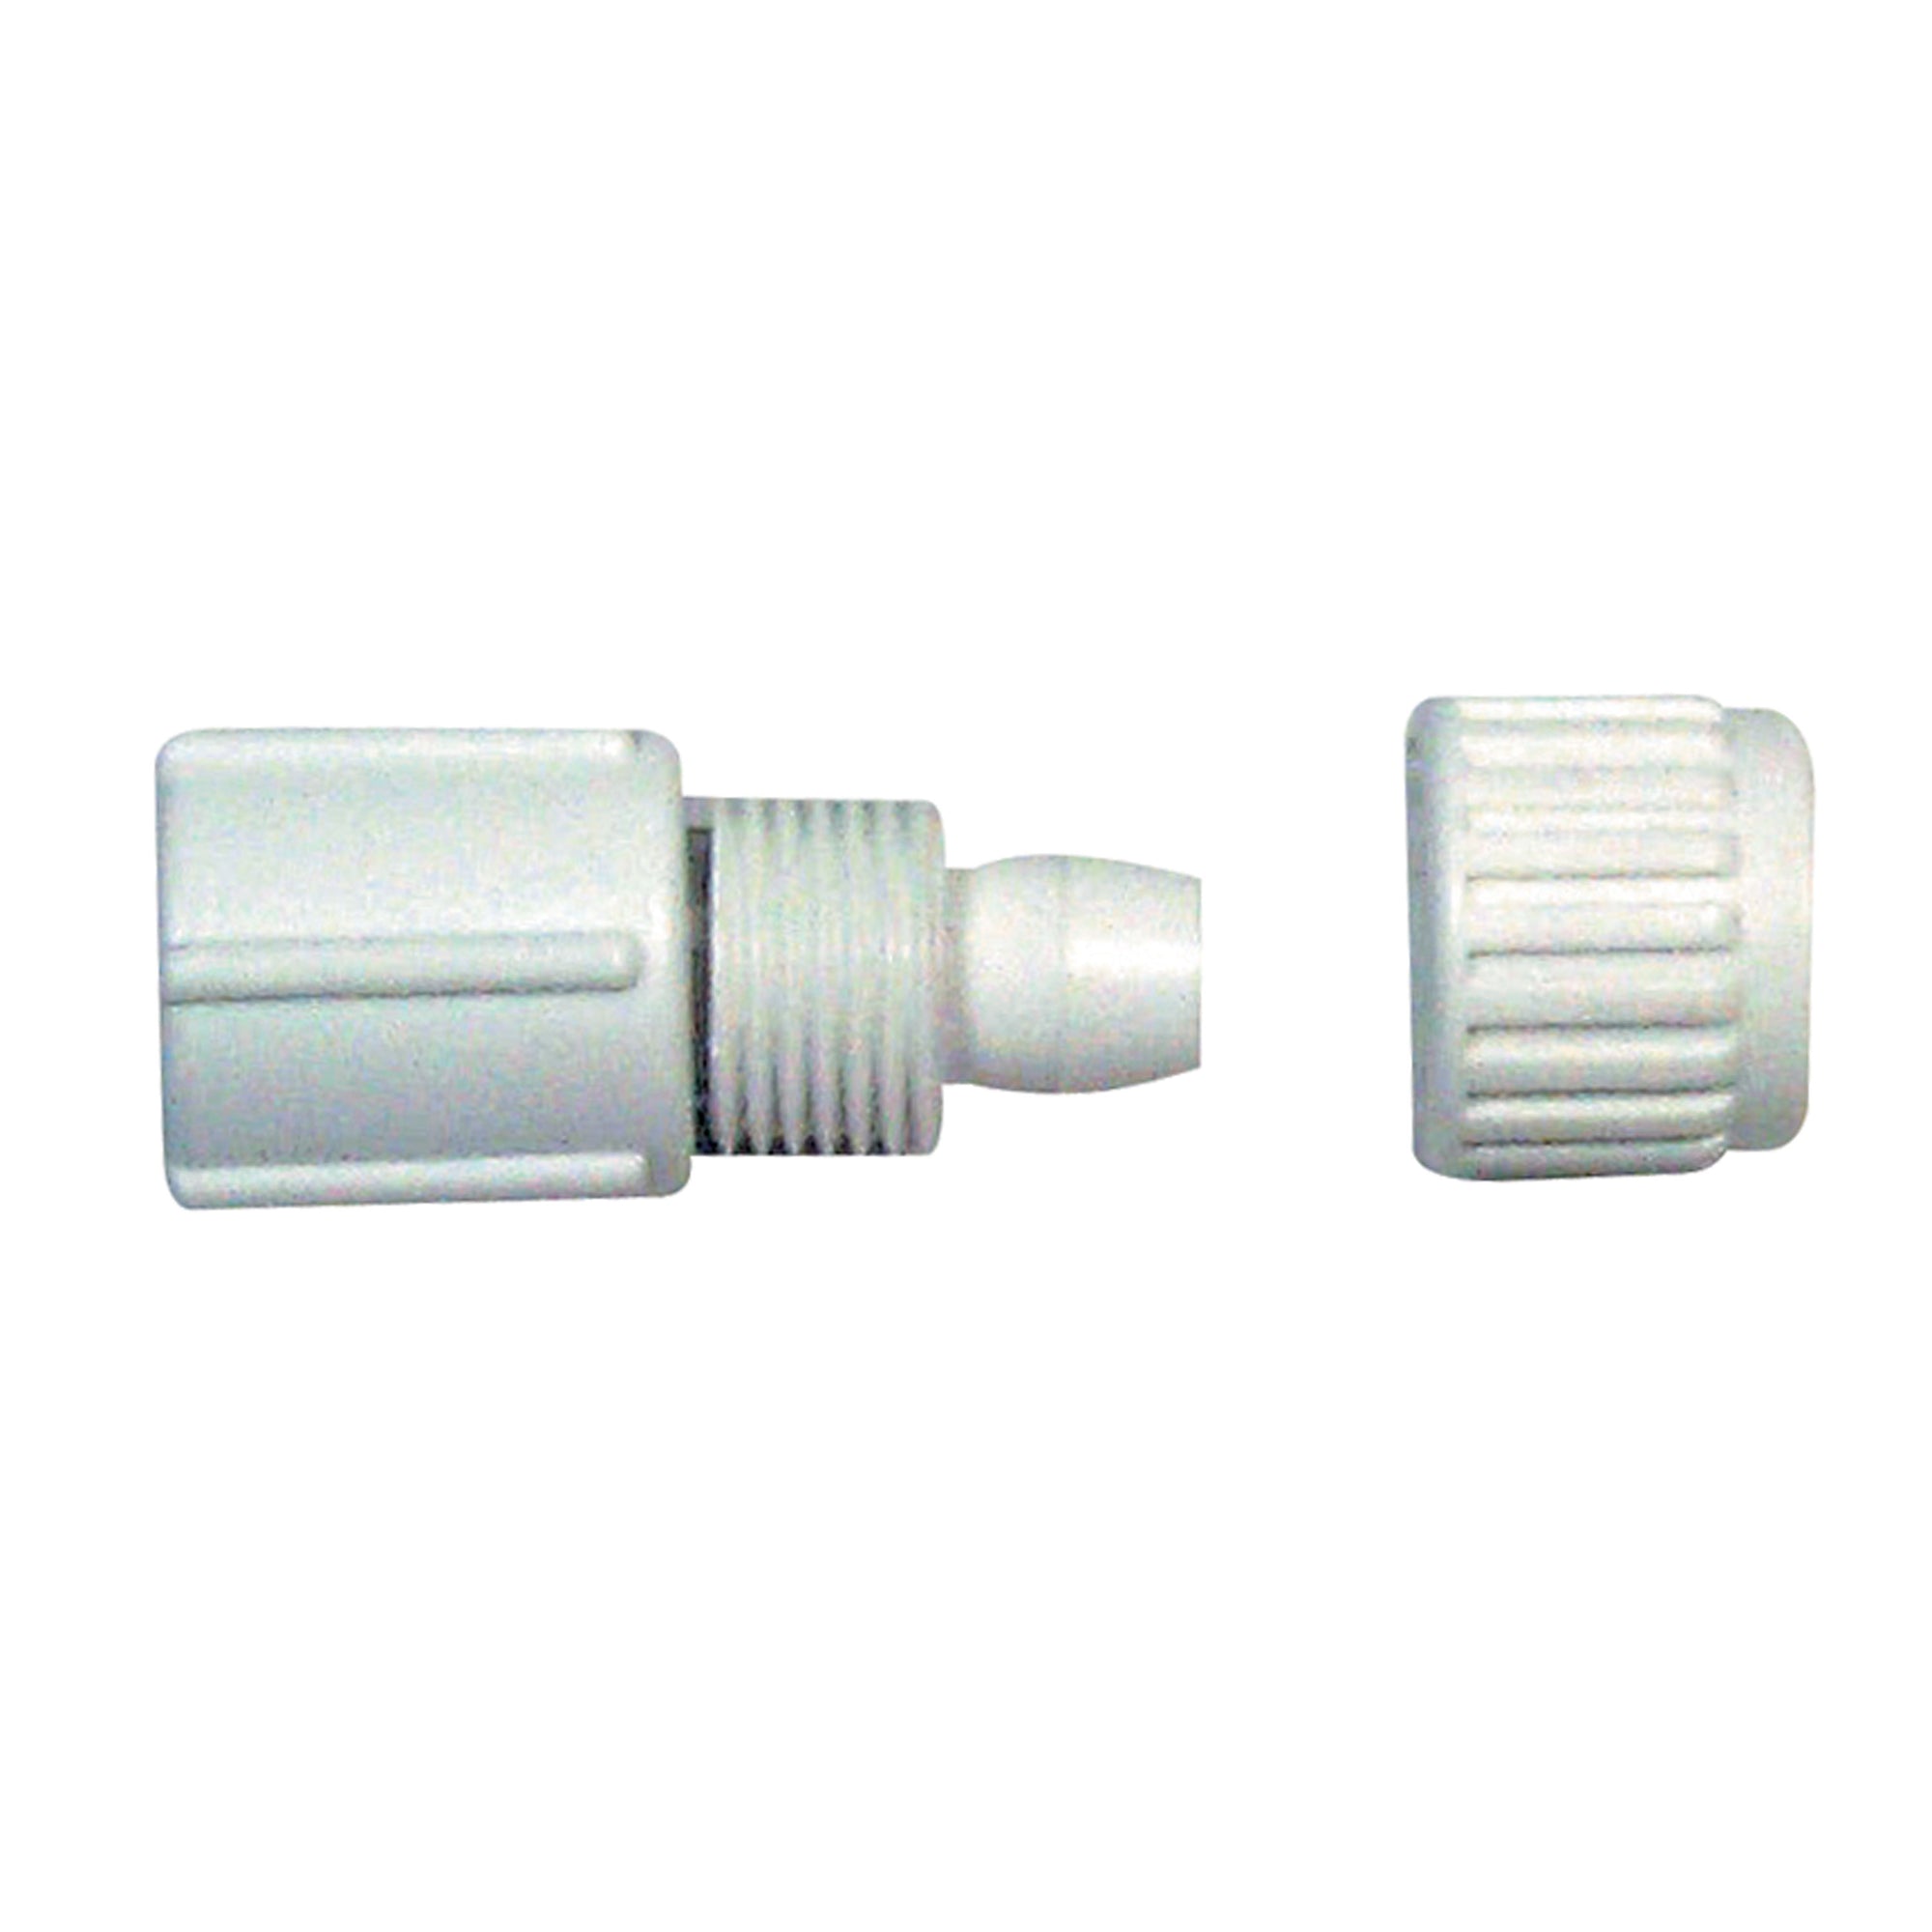 Flair-It 16873 Coupling 1/2X1/2 Fpt Swiv